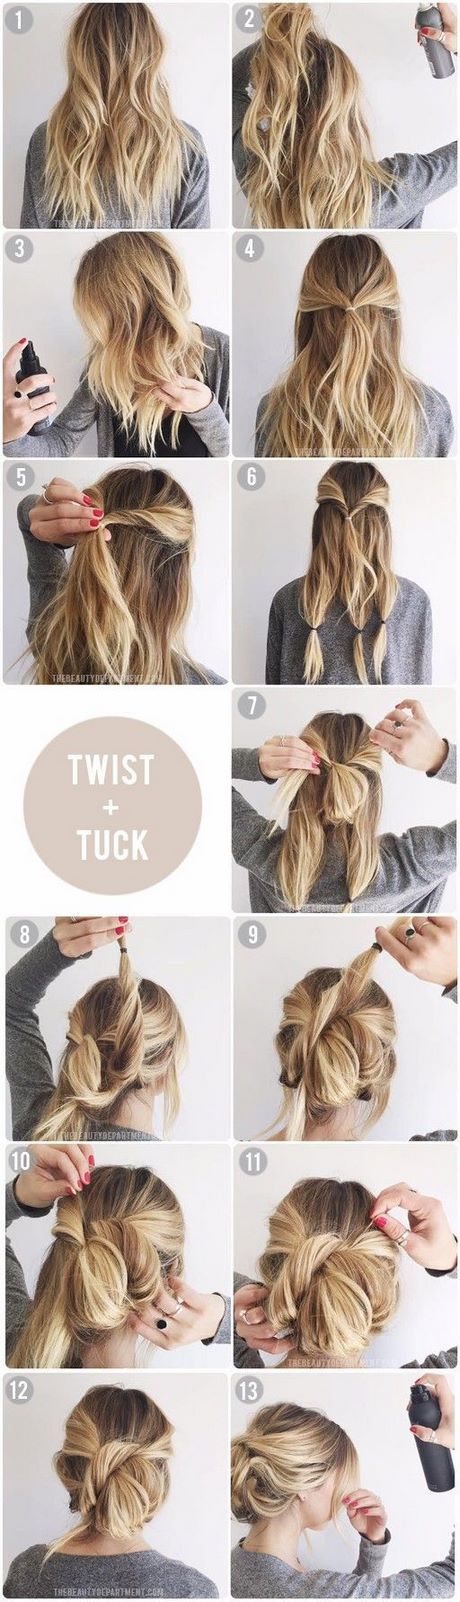 easiest-updo-ever-70 Easiest updo ever